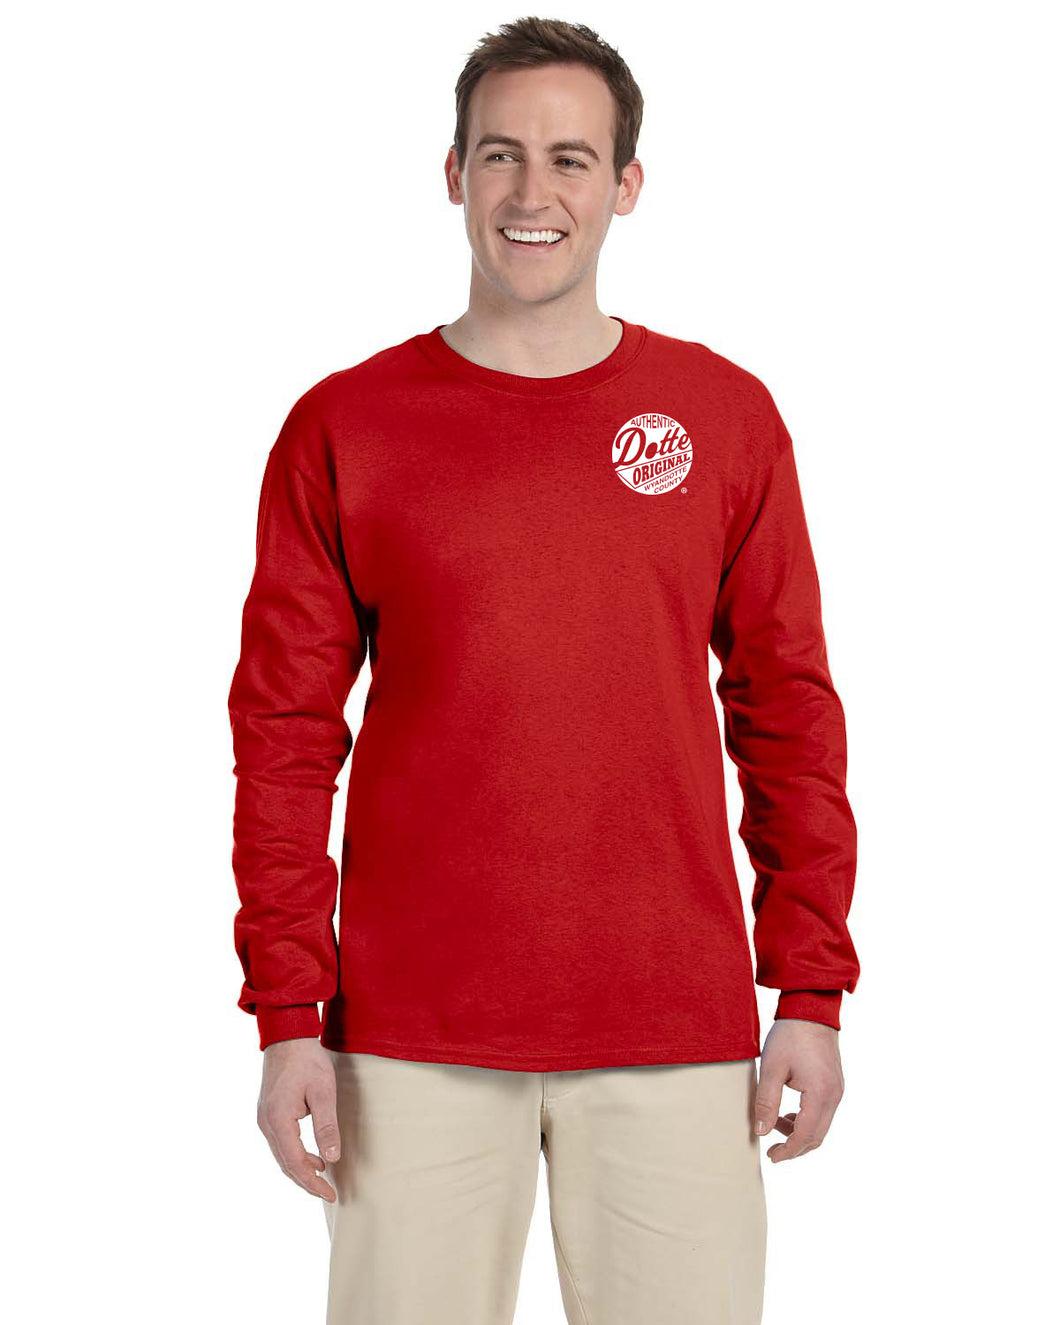 Adult Red Long Sleeve Dotte Shirt